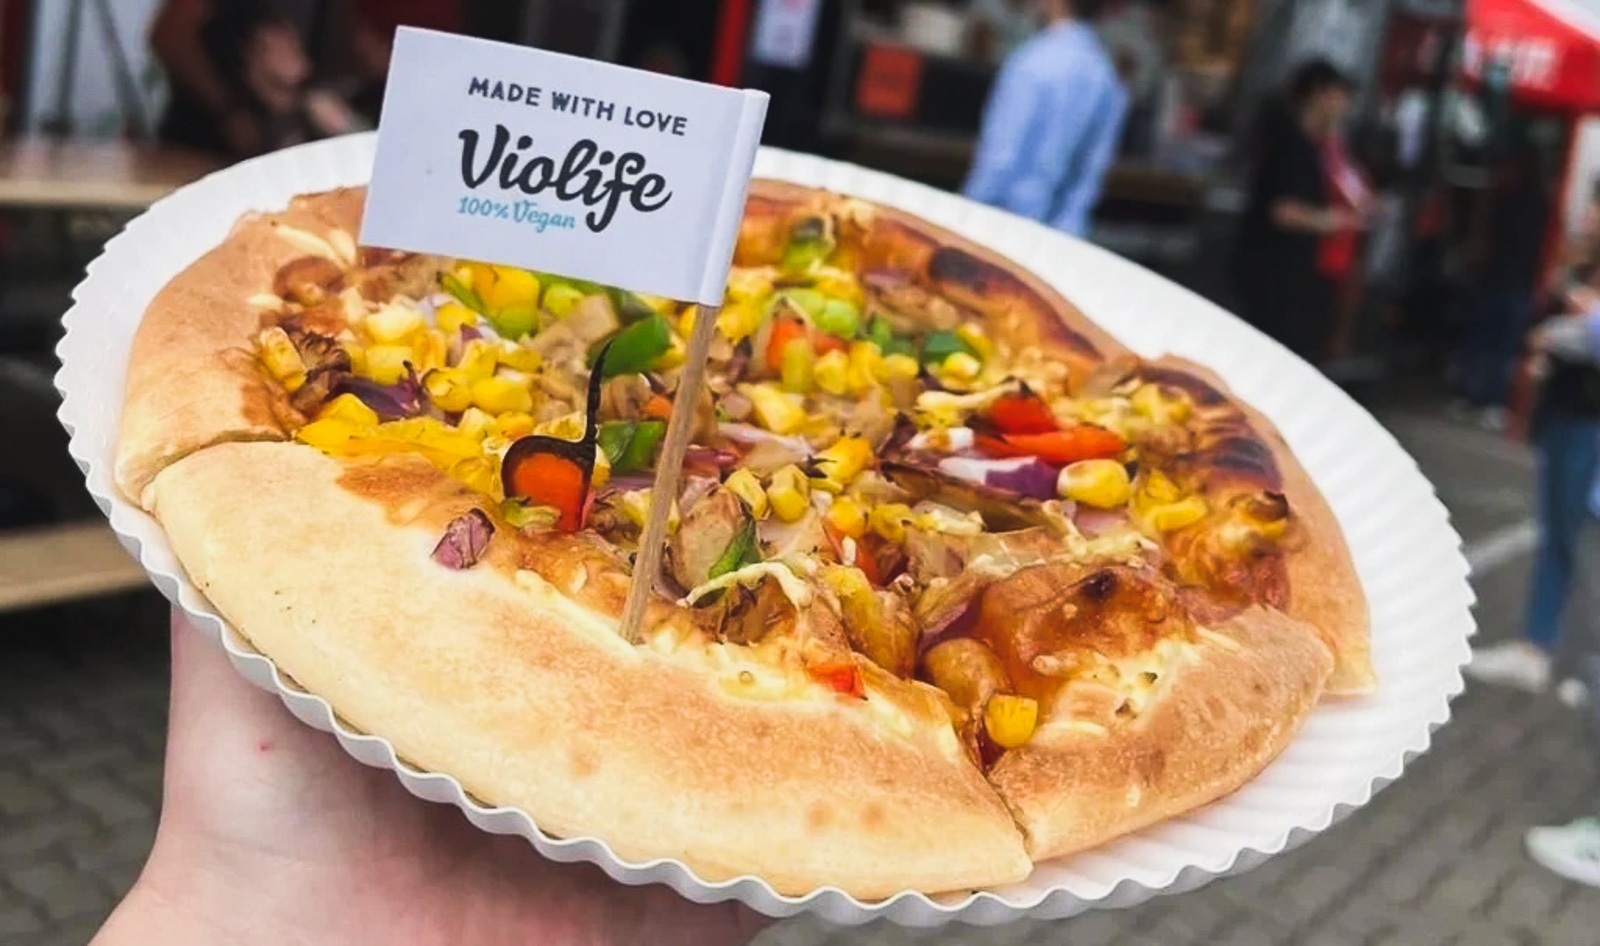 Pizza Hut Just Launched 3 Cheesy Vegan Pizzas. Here’s Where to Get Them in Europe.